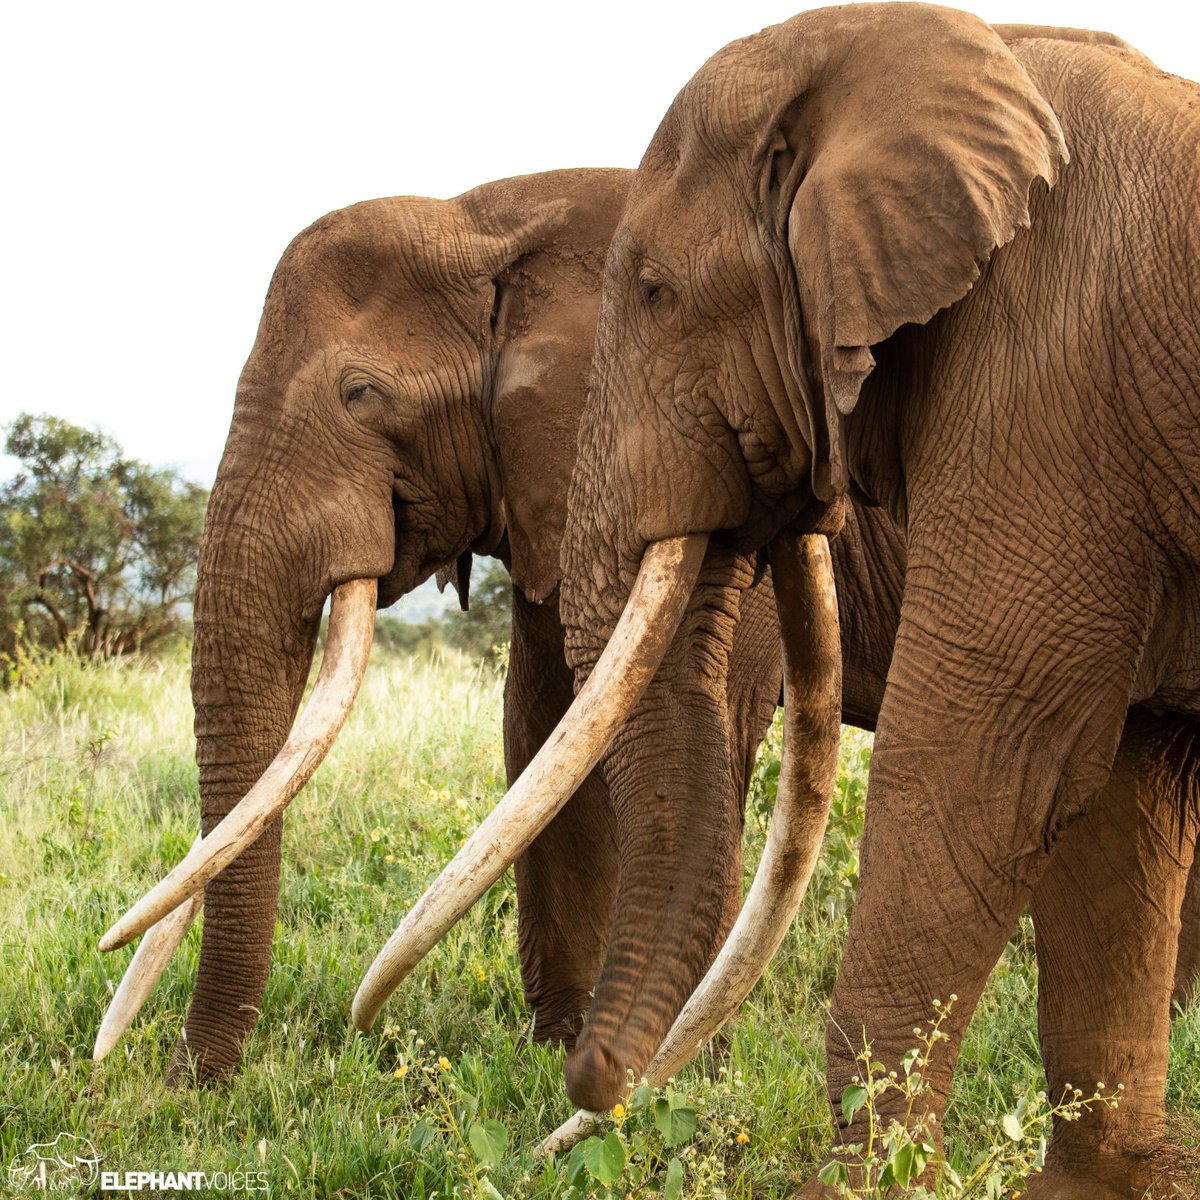 We have issued a joint statement with the @ElephantTrust & @biglifeafrica regarding the recent killing of Amboseli male elephants by trophy hunters in Tanzania. You can access it here: bit.ly/trophyhuntinge… Please share far & wide. Thank you!